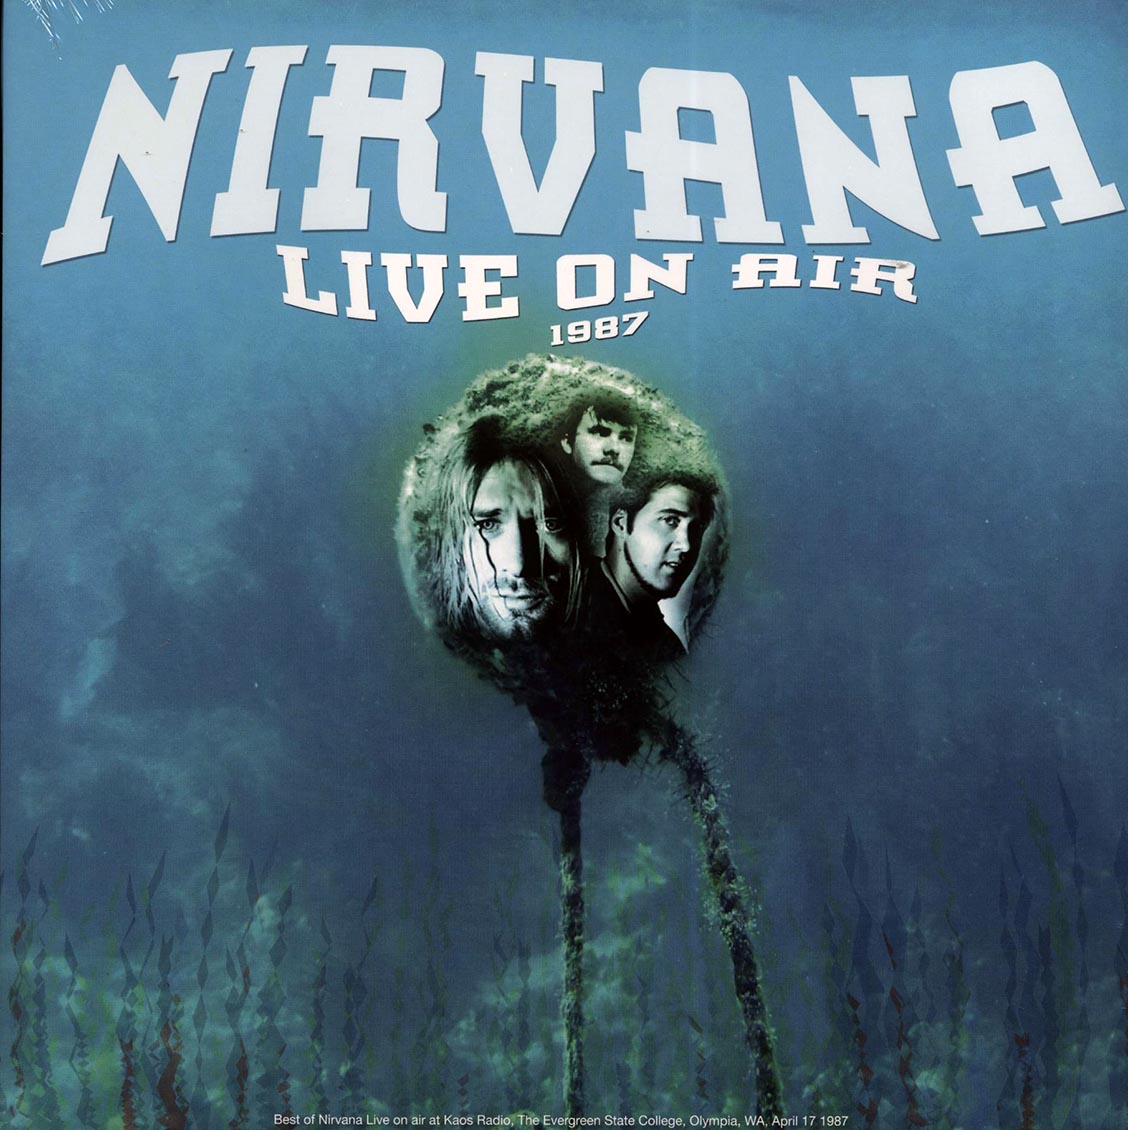 Nirvana - Live On The Air 1987: The Evergreen State College, Olympia, WA - Vinyl LP